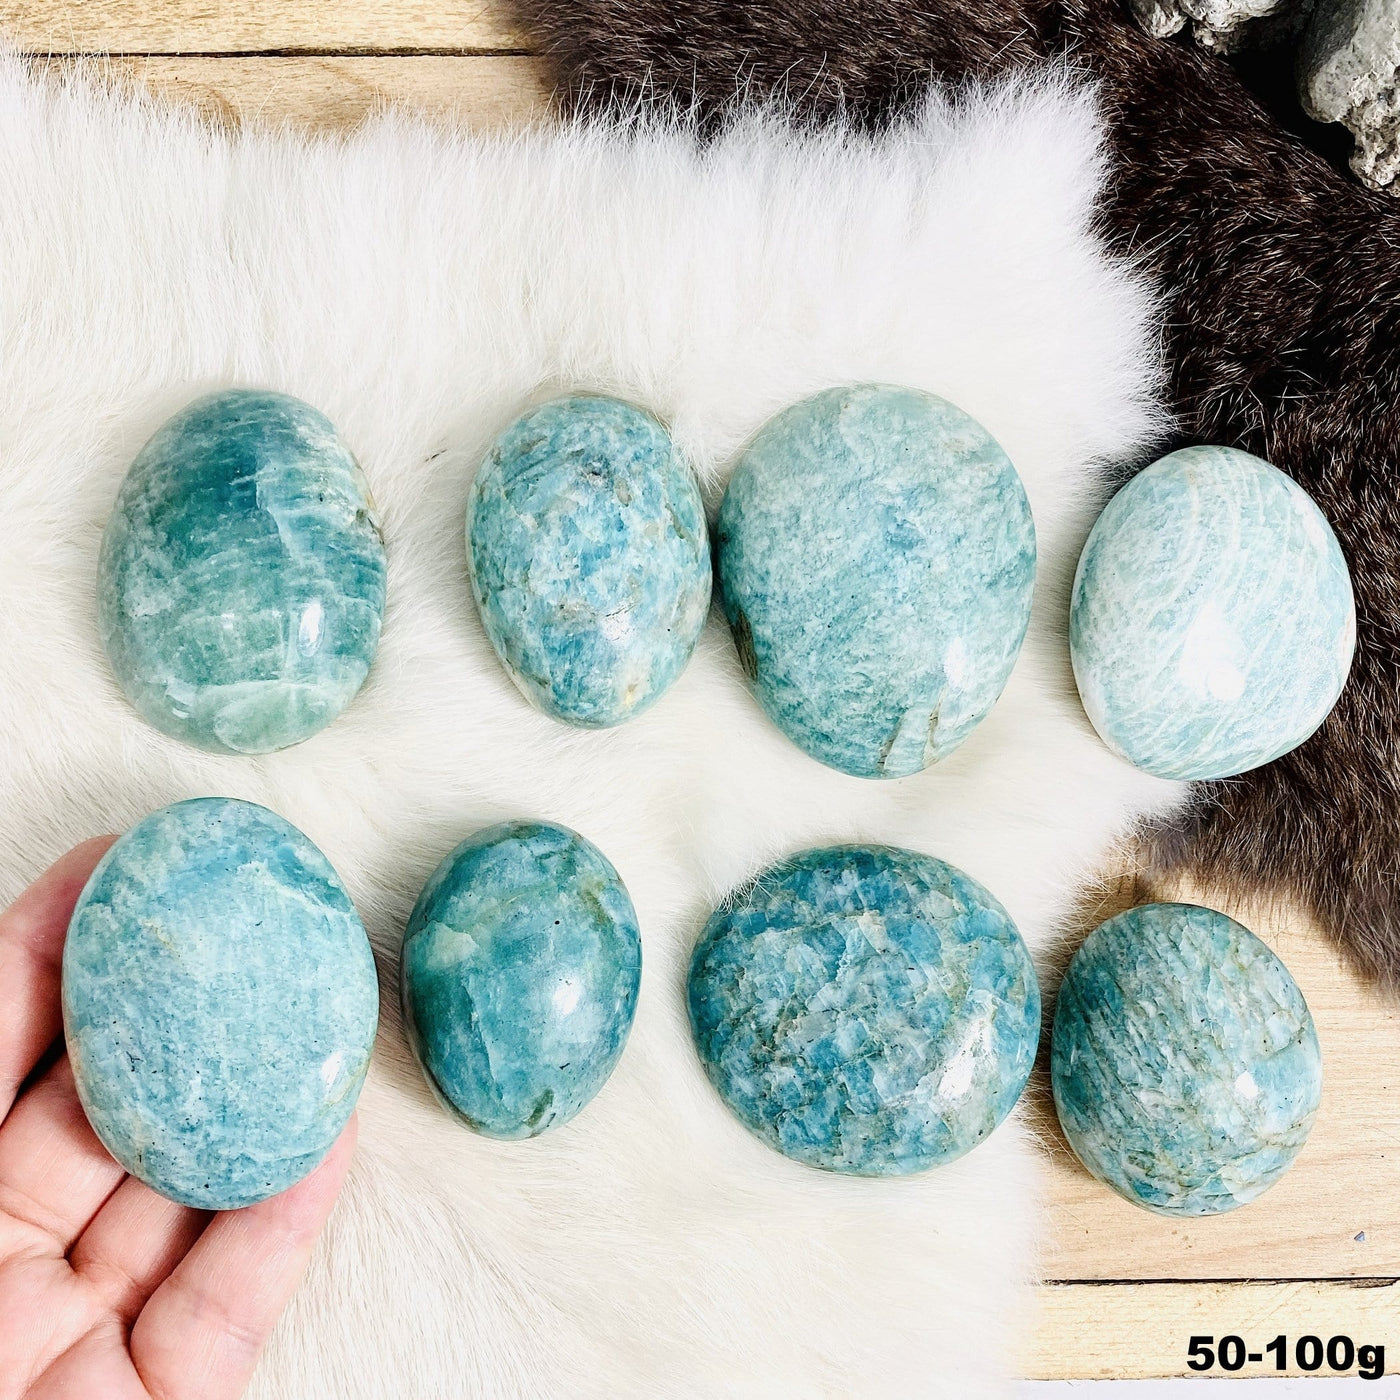 Picture of our fifty to one hundred  grams palm stones.